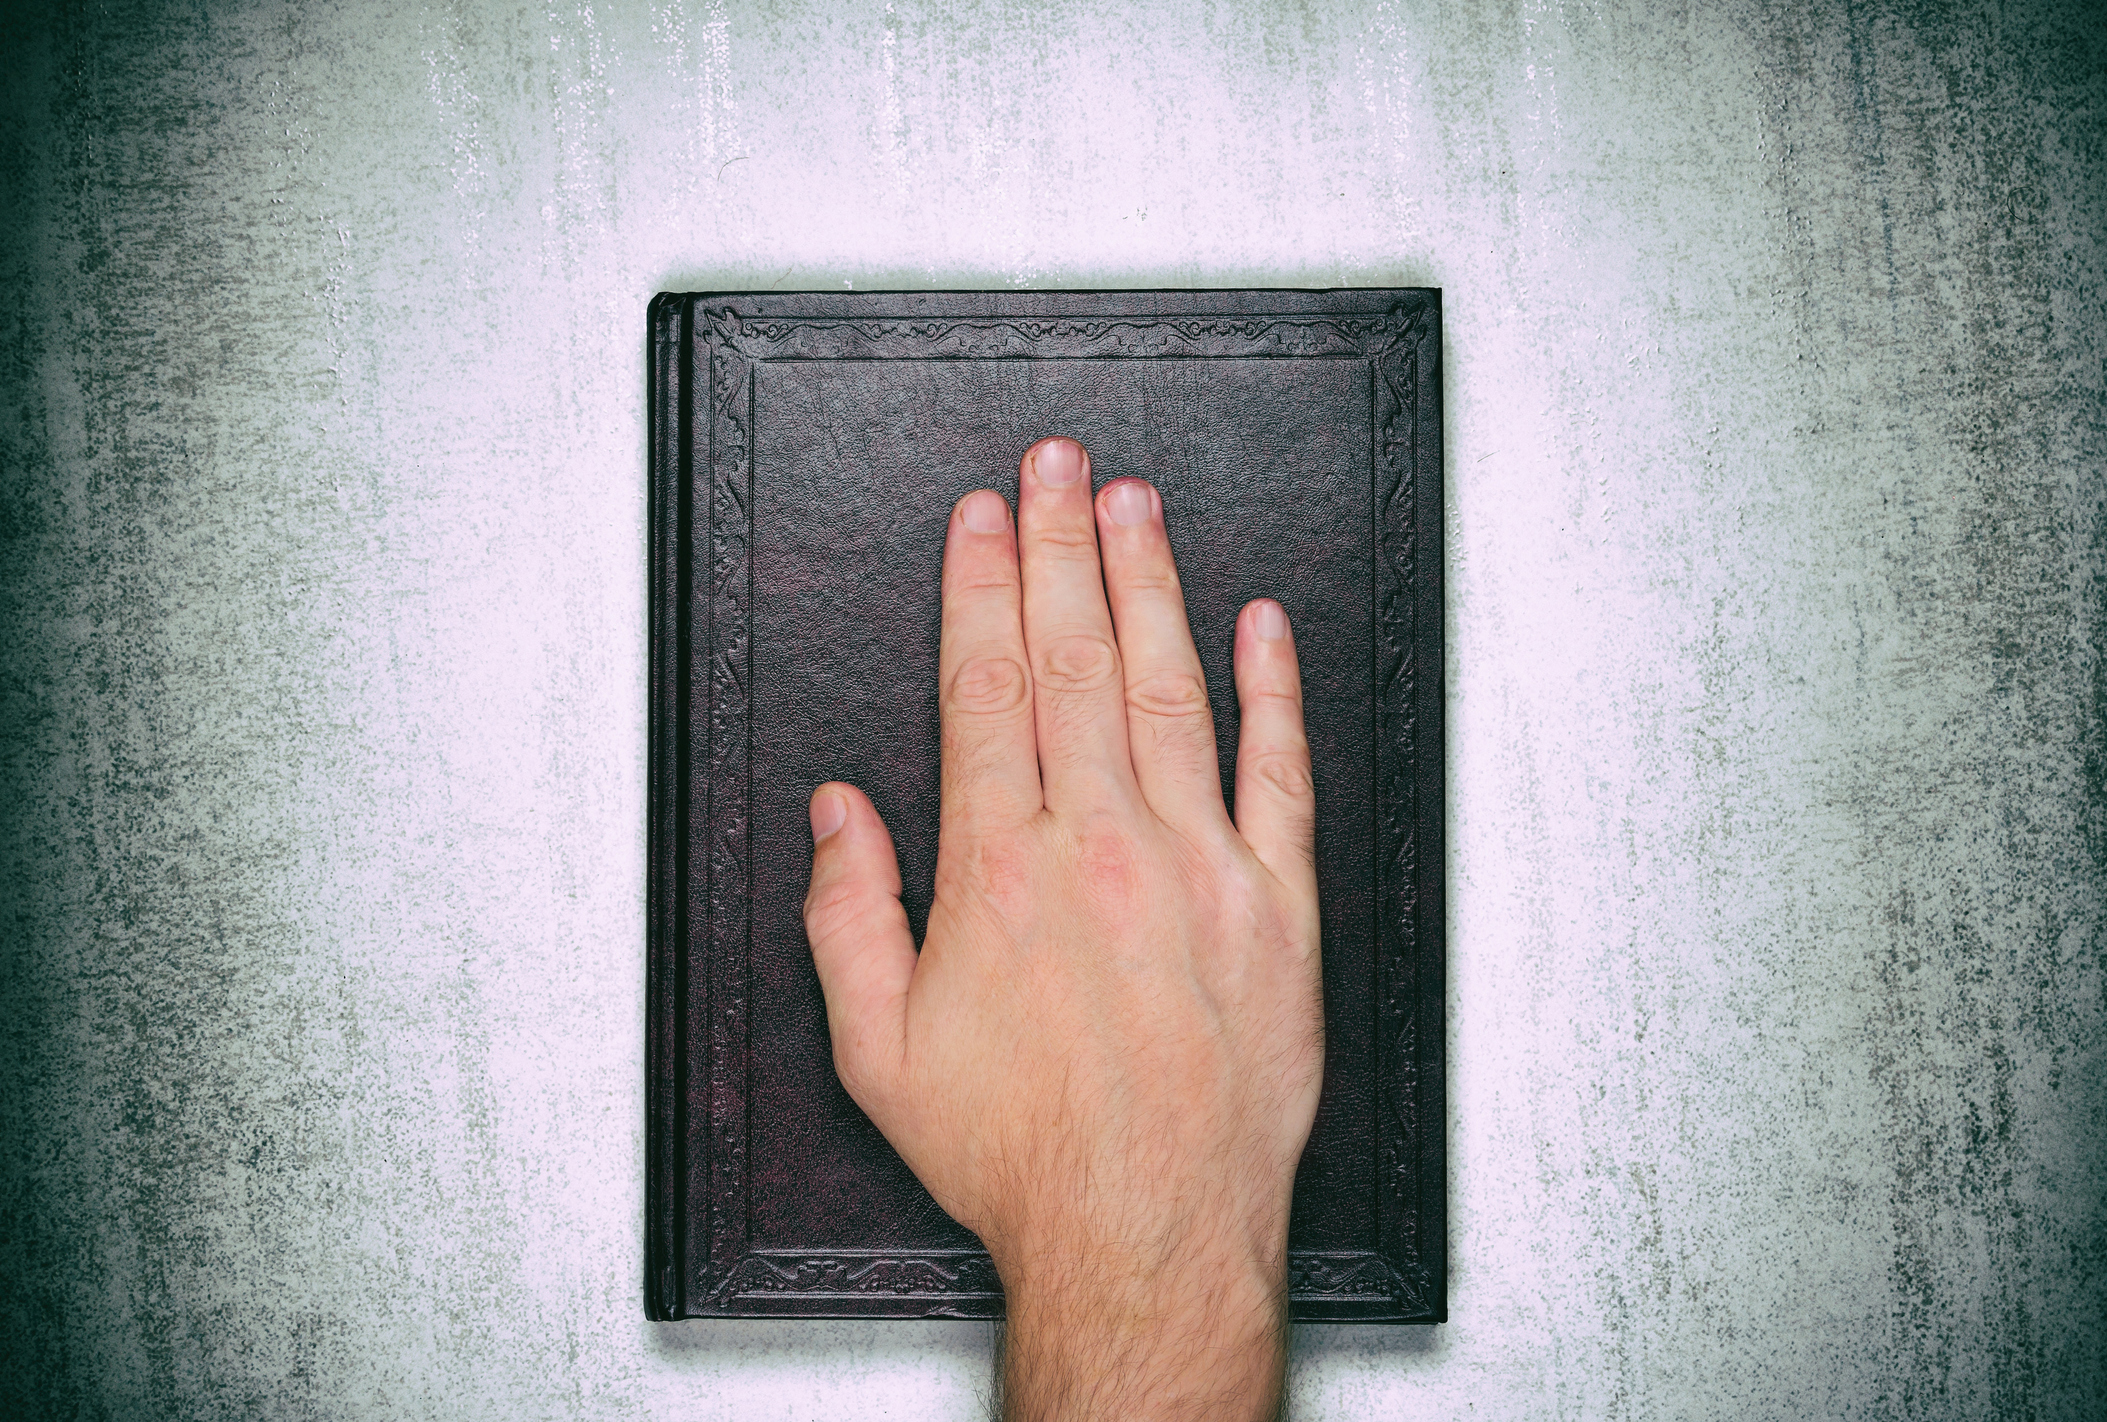 A male palm on a book, an oath on the bible, Top view close up